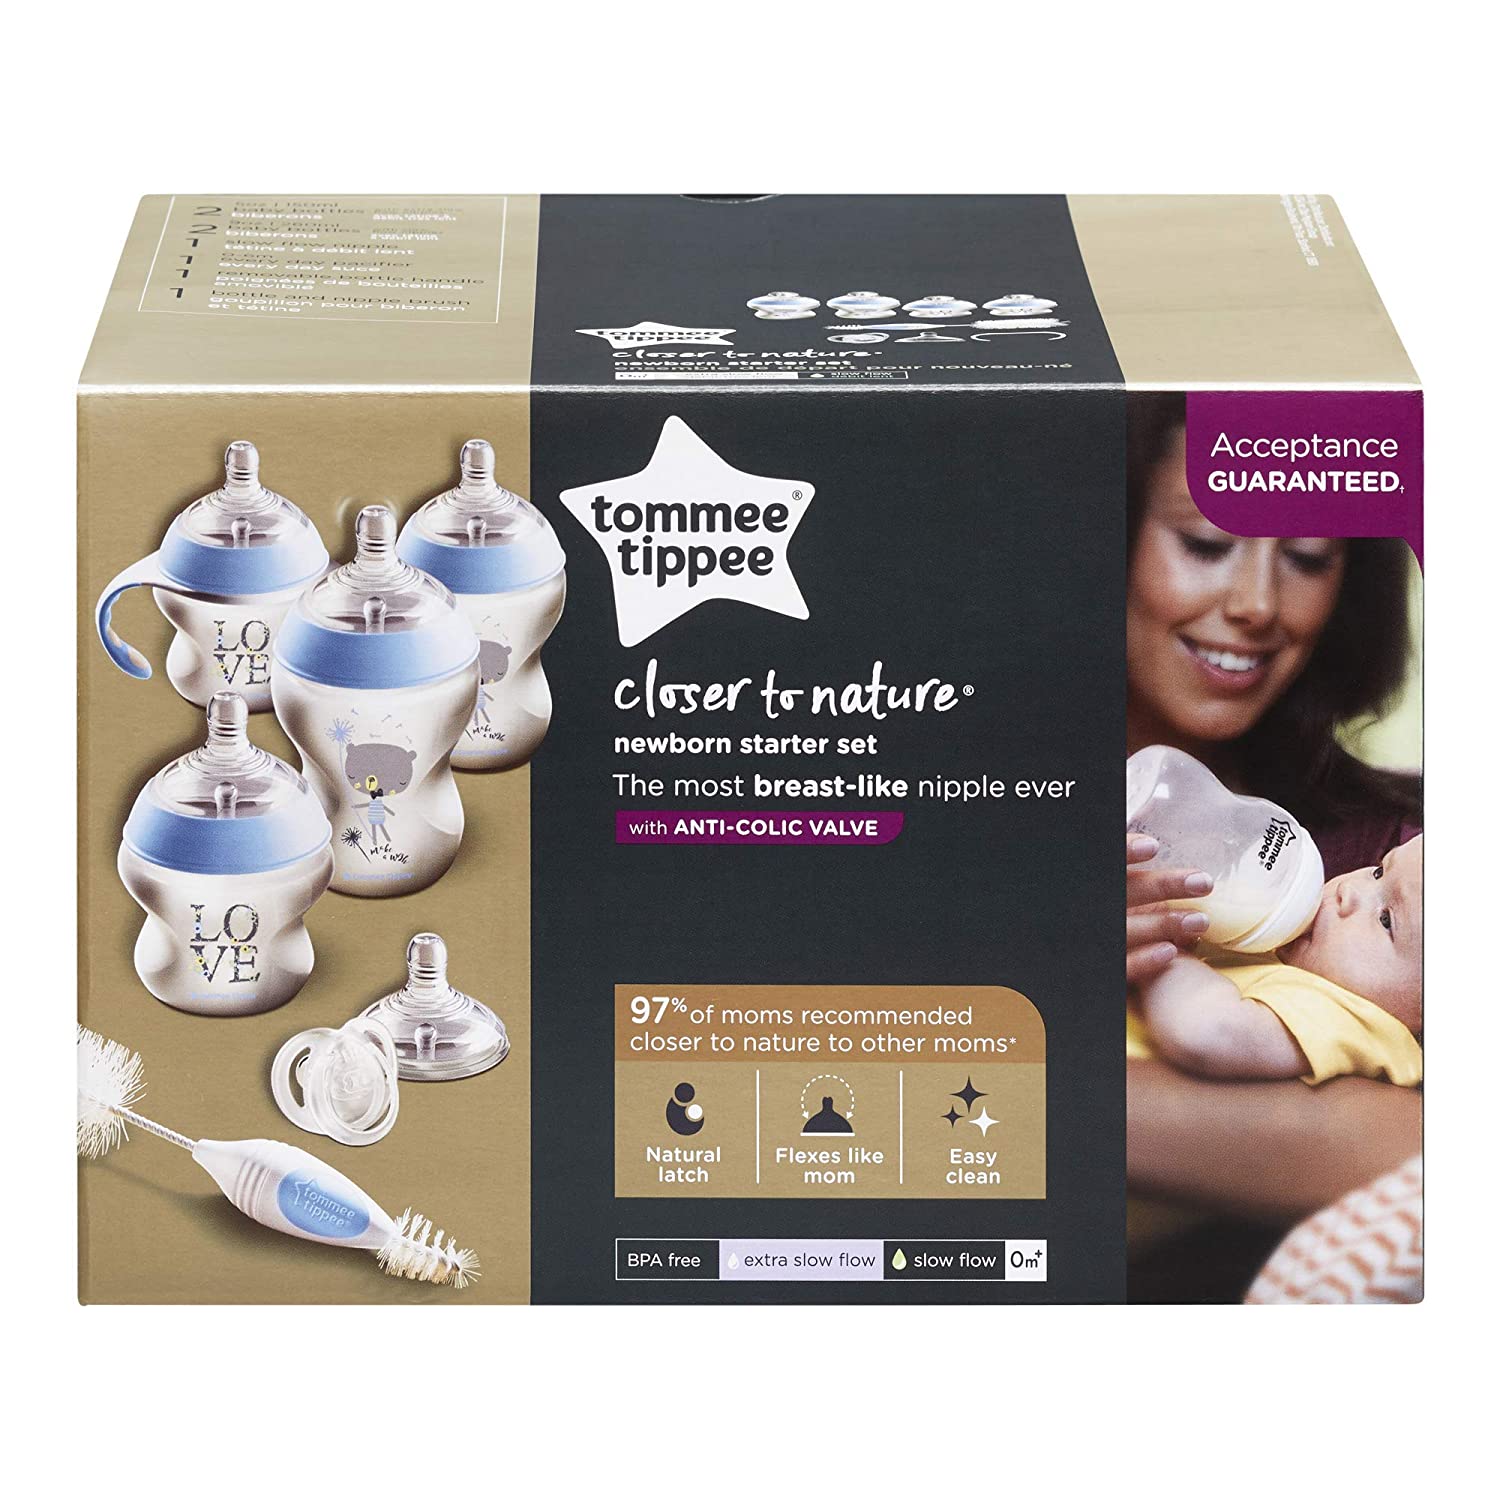 Tommee Tippee Closer to Nature Newborn Set - Blue